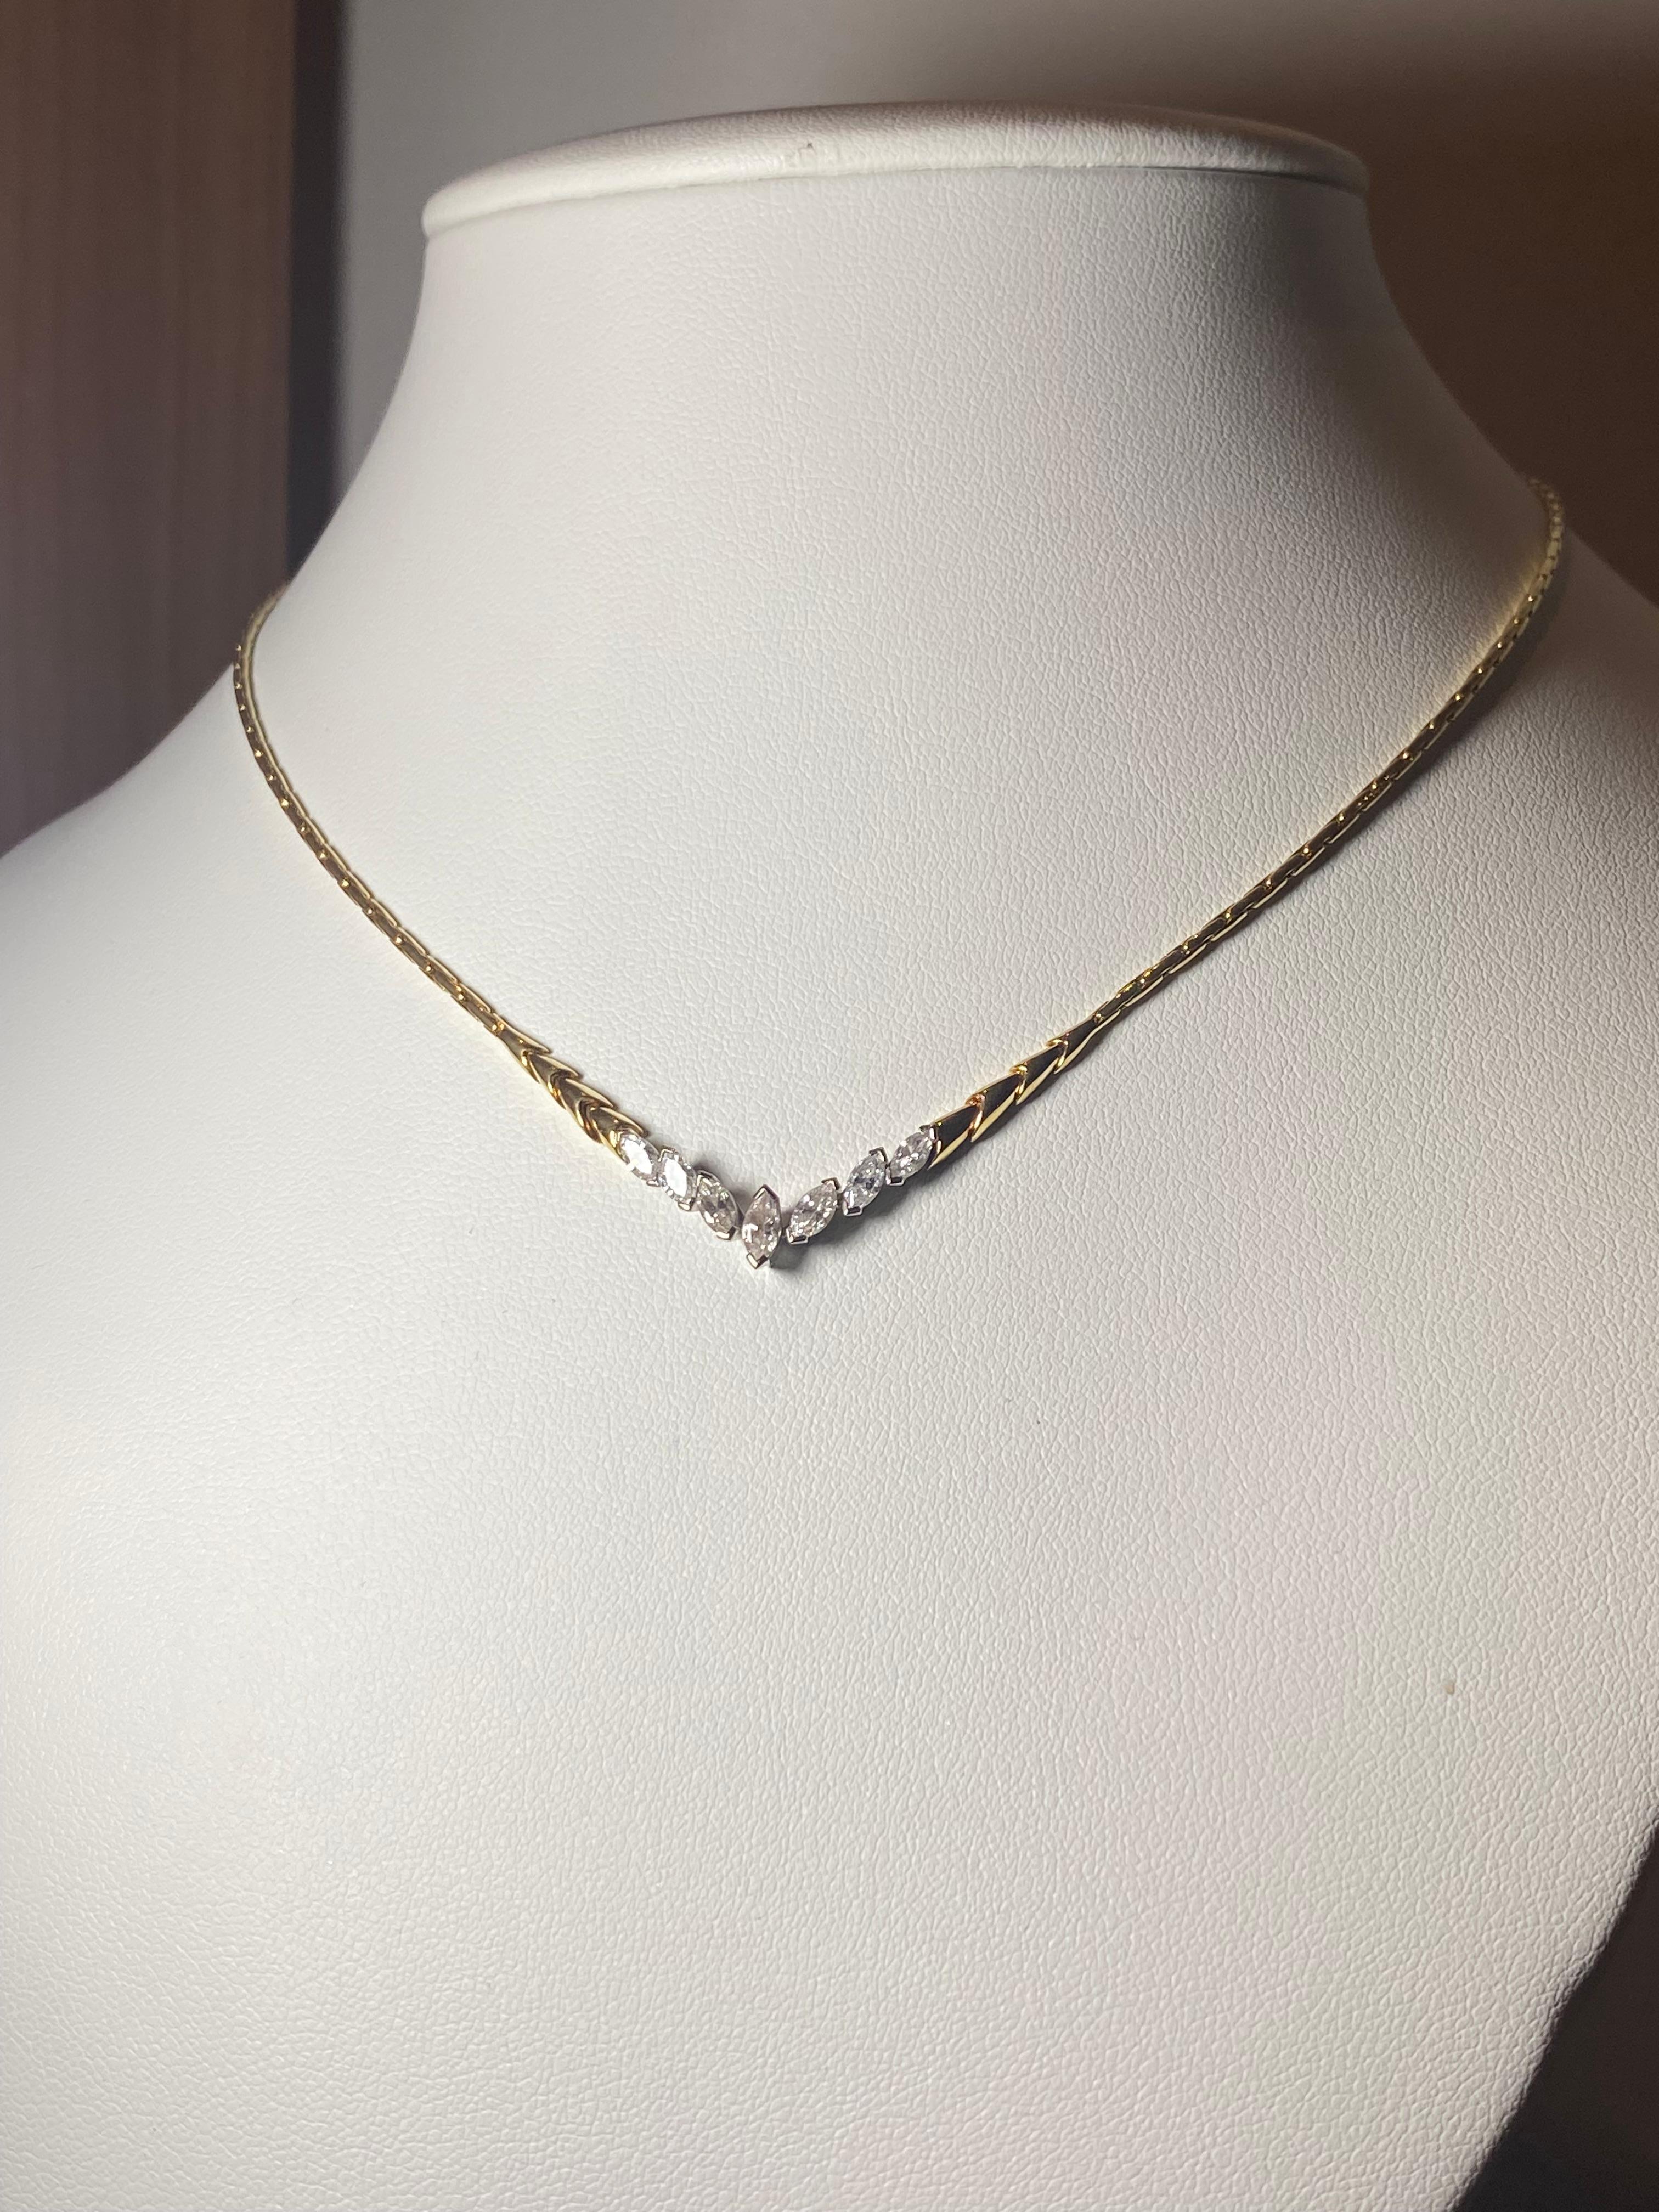 1.00ct Marquise Diamond (x 7) Necklace in 18K Yellow Gold, valued at $5900. 3